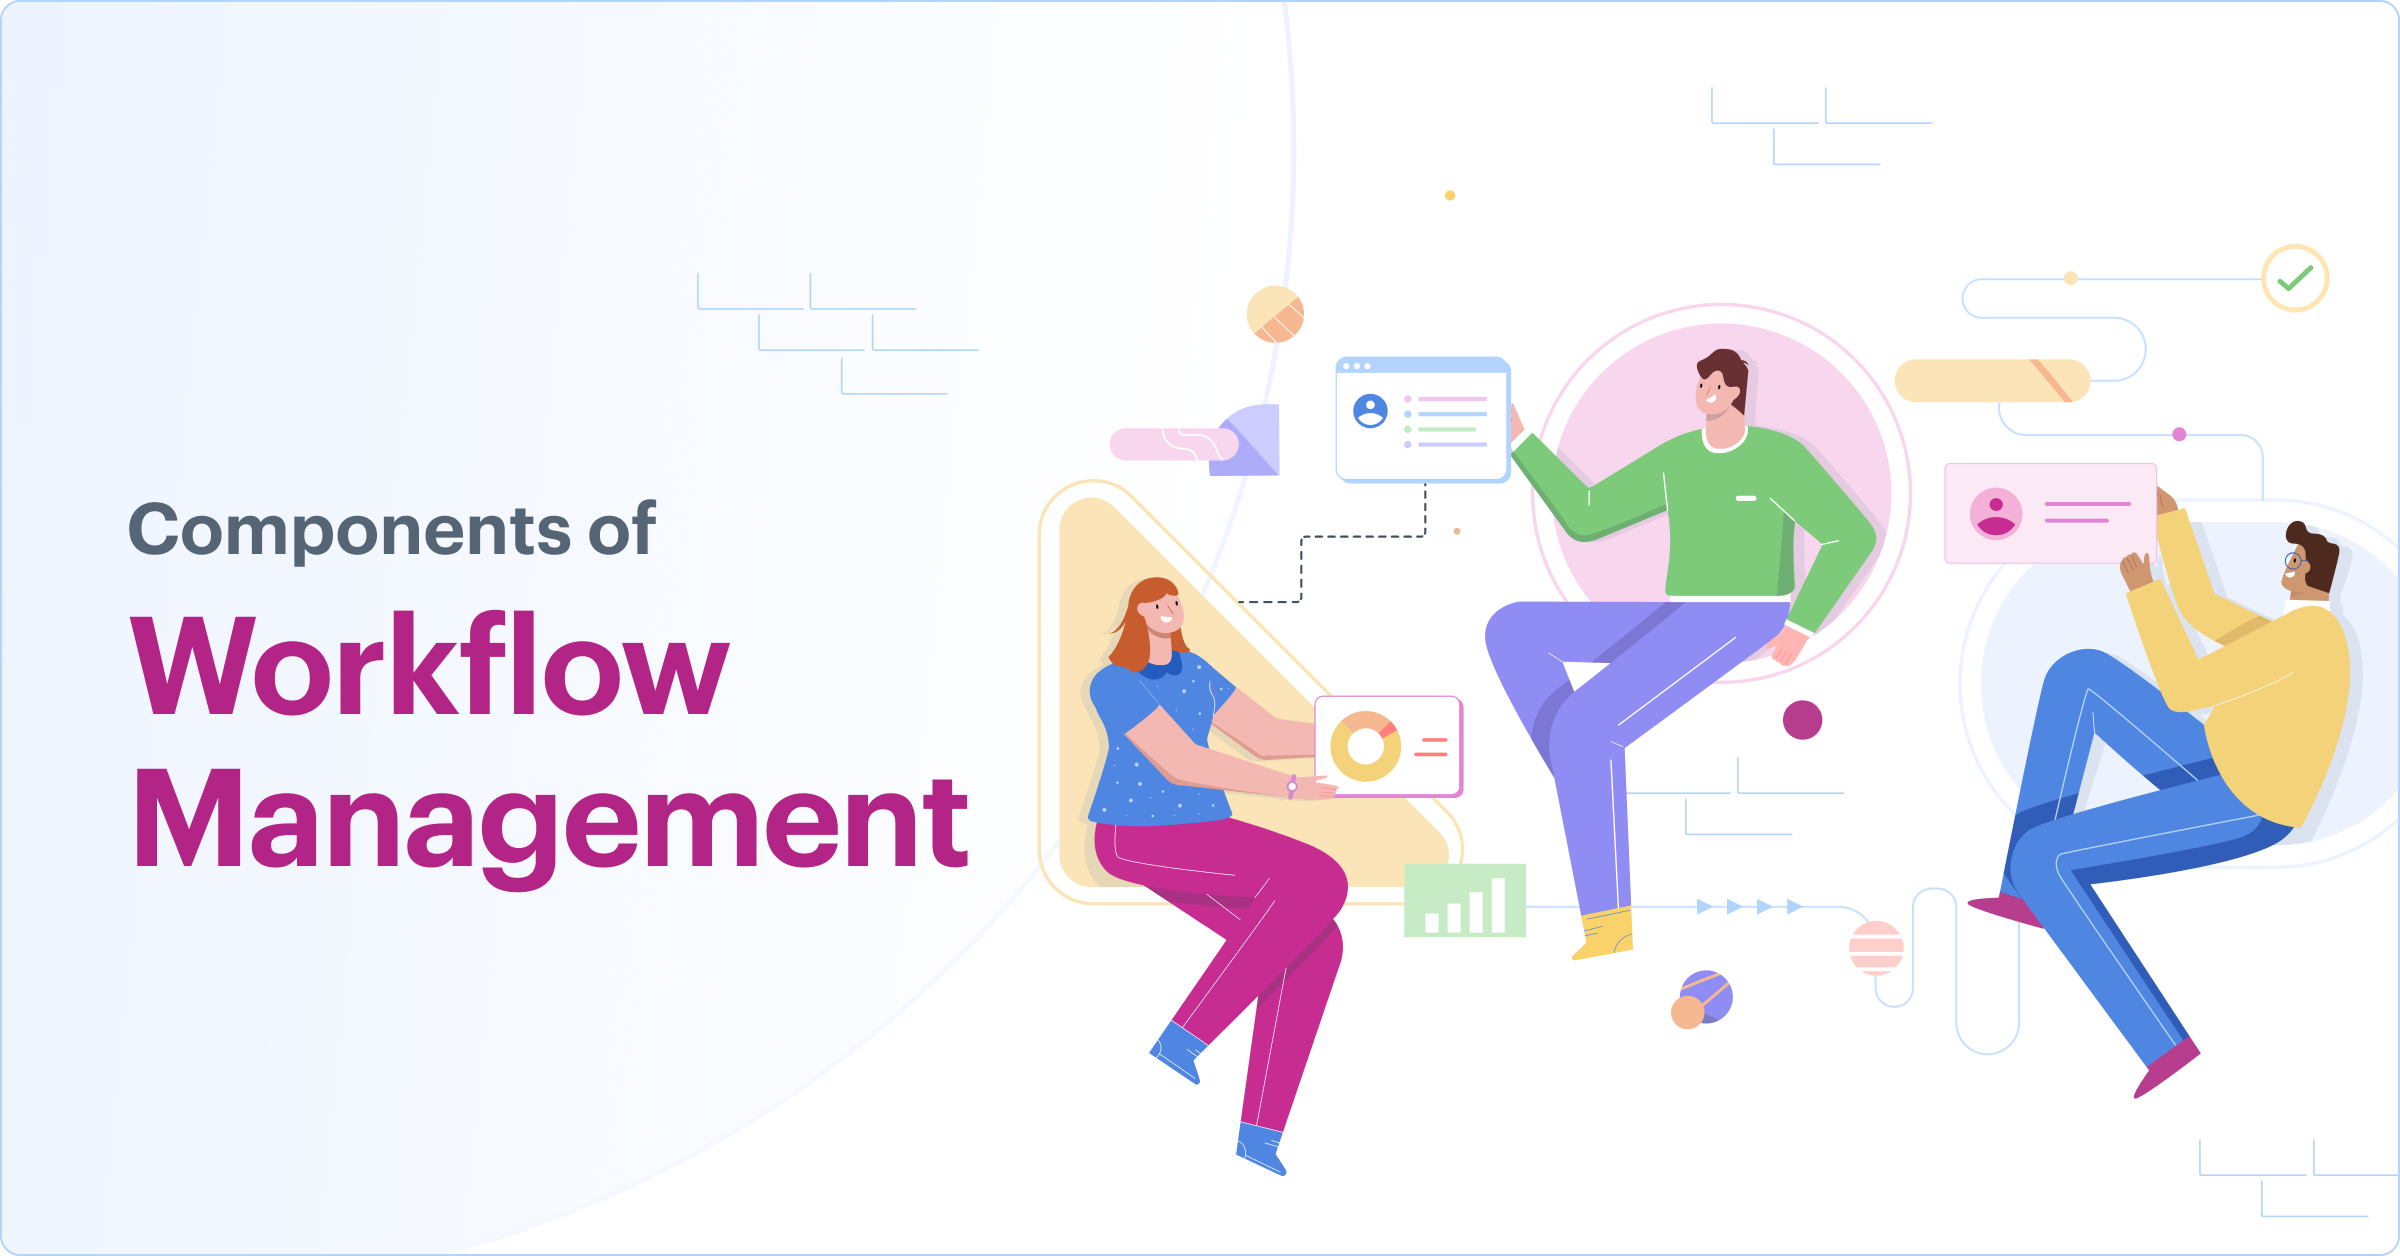 Components of Workflow Management